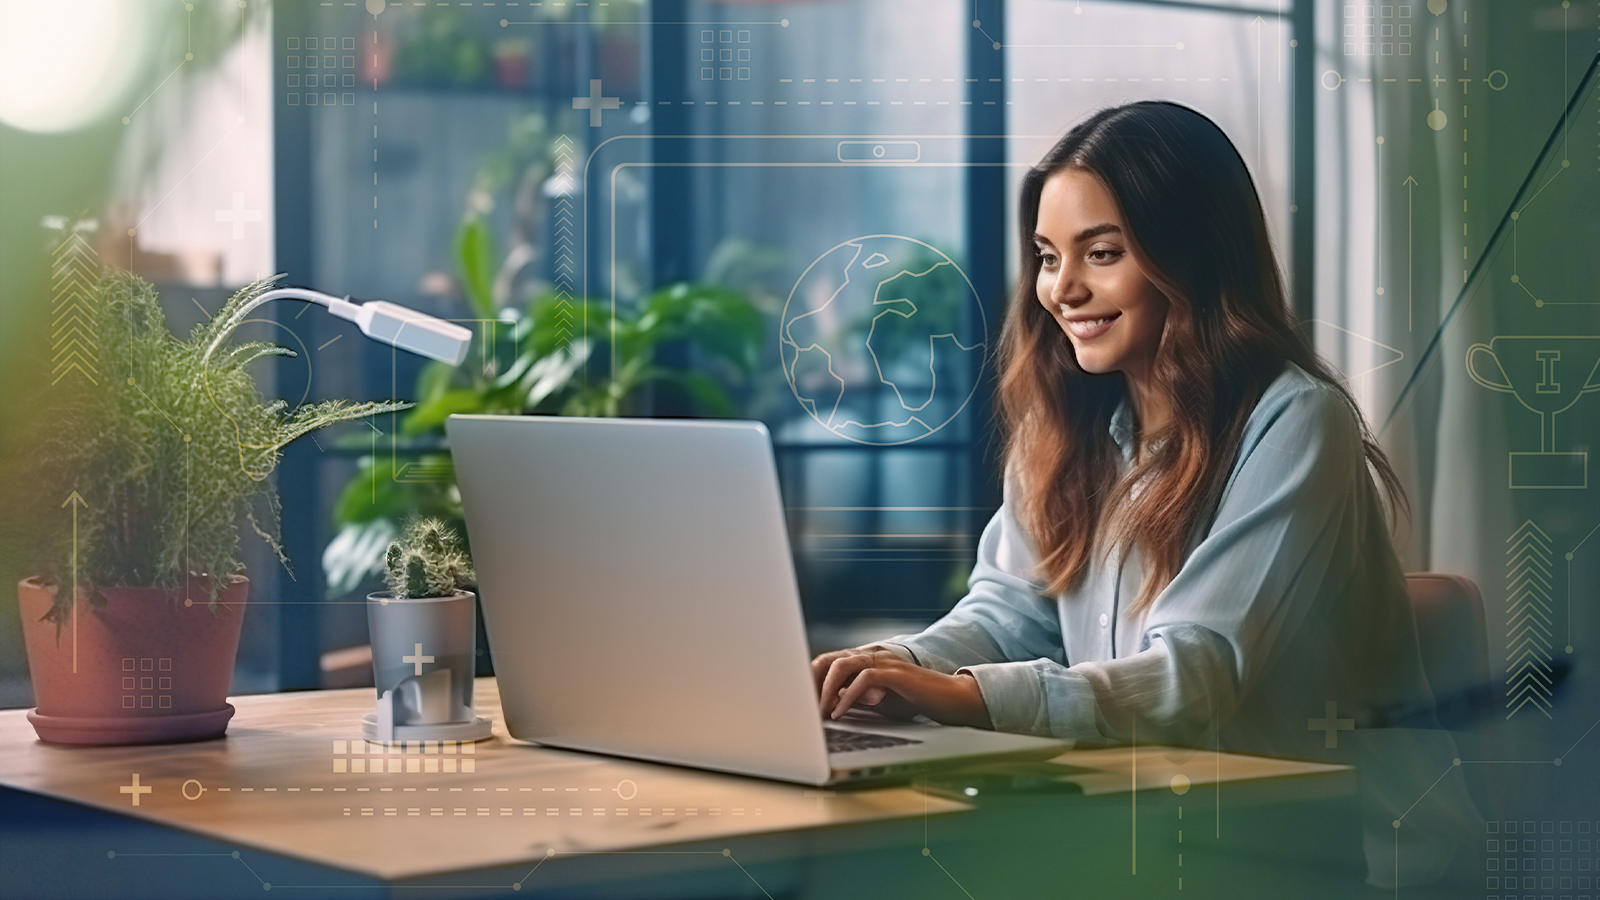 Smiling woman using a laptop in a plant-filled home office with digital icons suggesting global connectivity and productivity